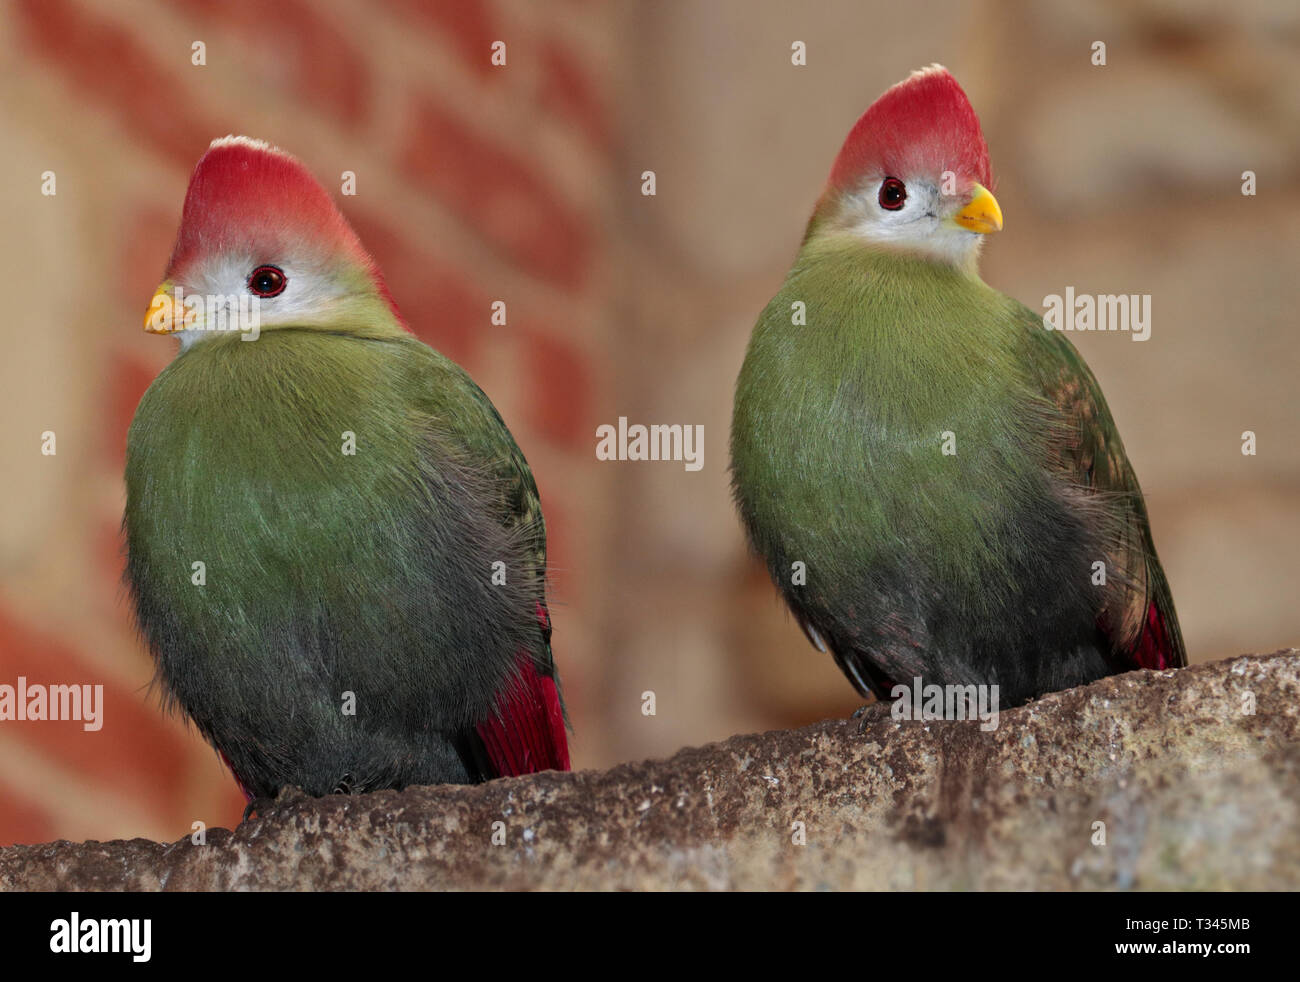 Two Red Crested Turacos (tauraco erythrolophus) Stock Photo